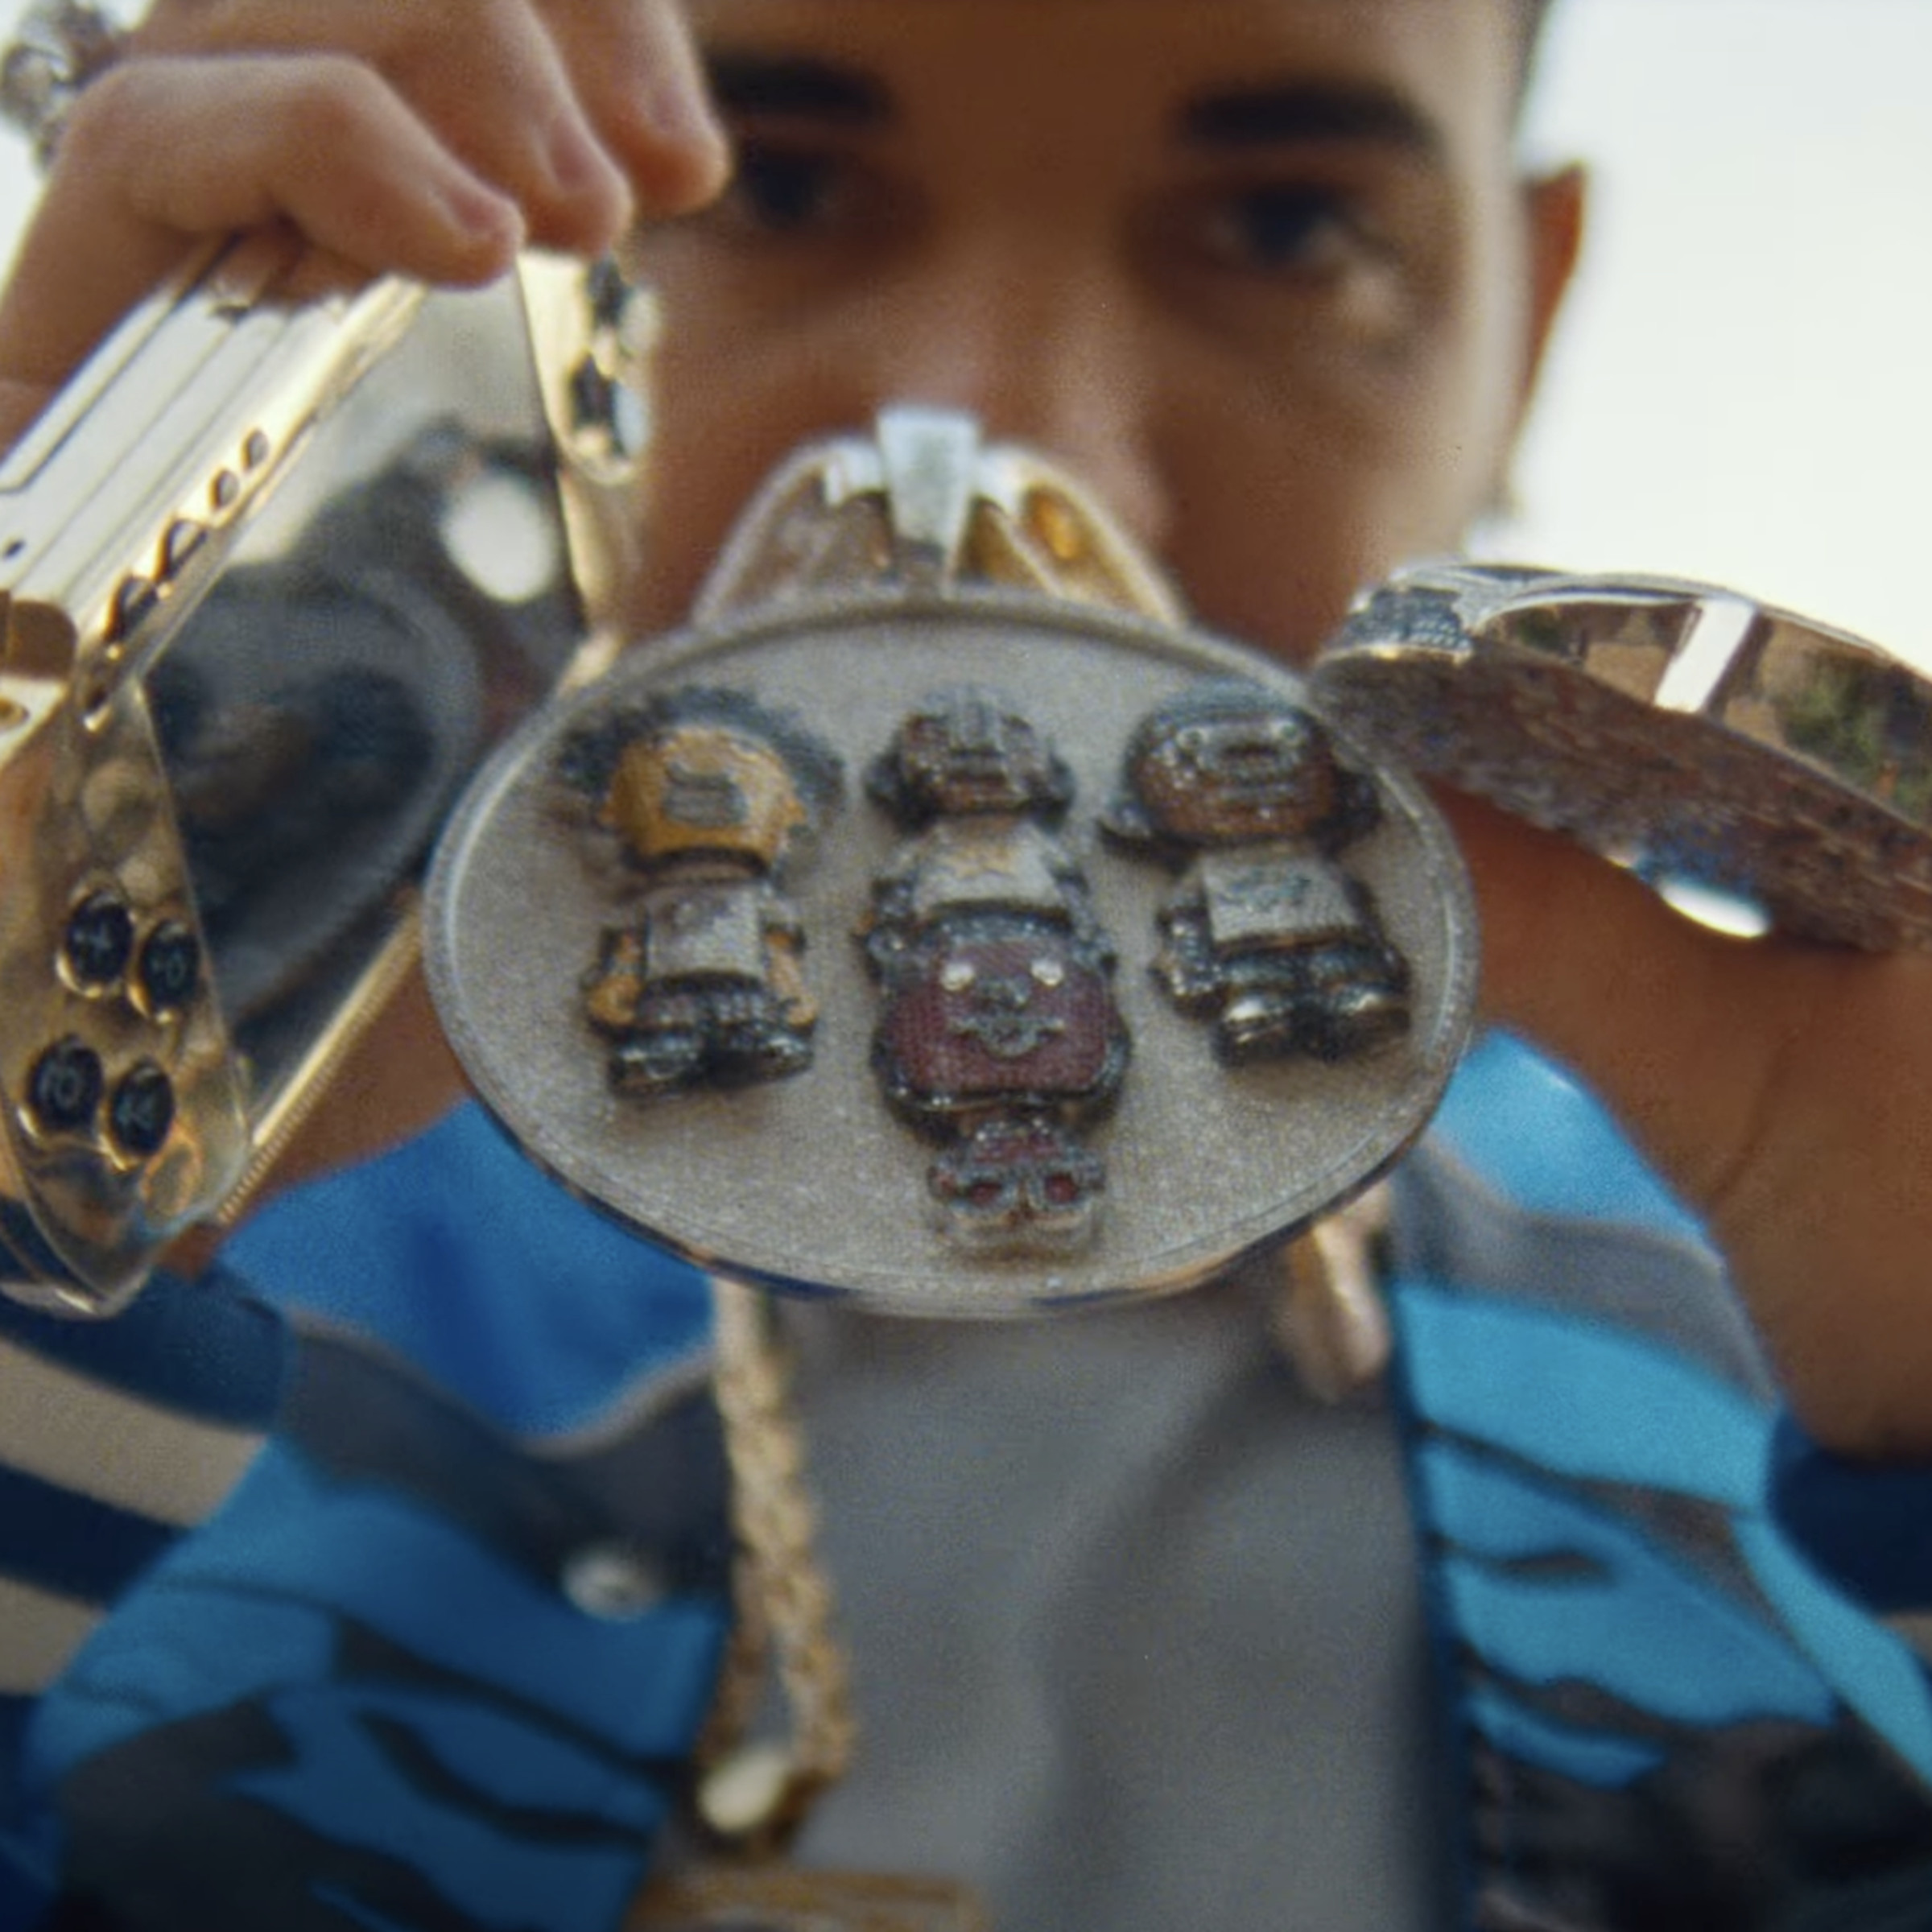 A close-up of a gold PSP and Pharrell Williams’ chains / medallions in the hands of Drake, who is holding it all right in front of his face.